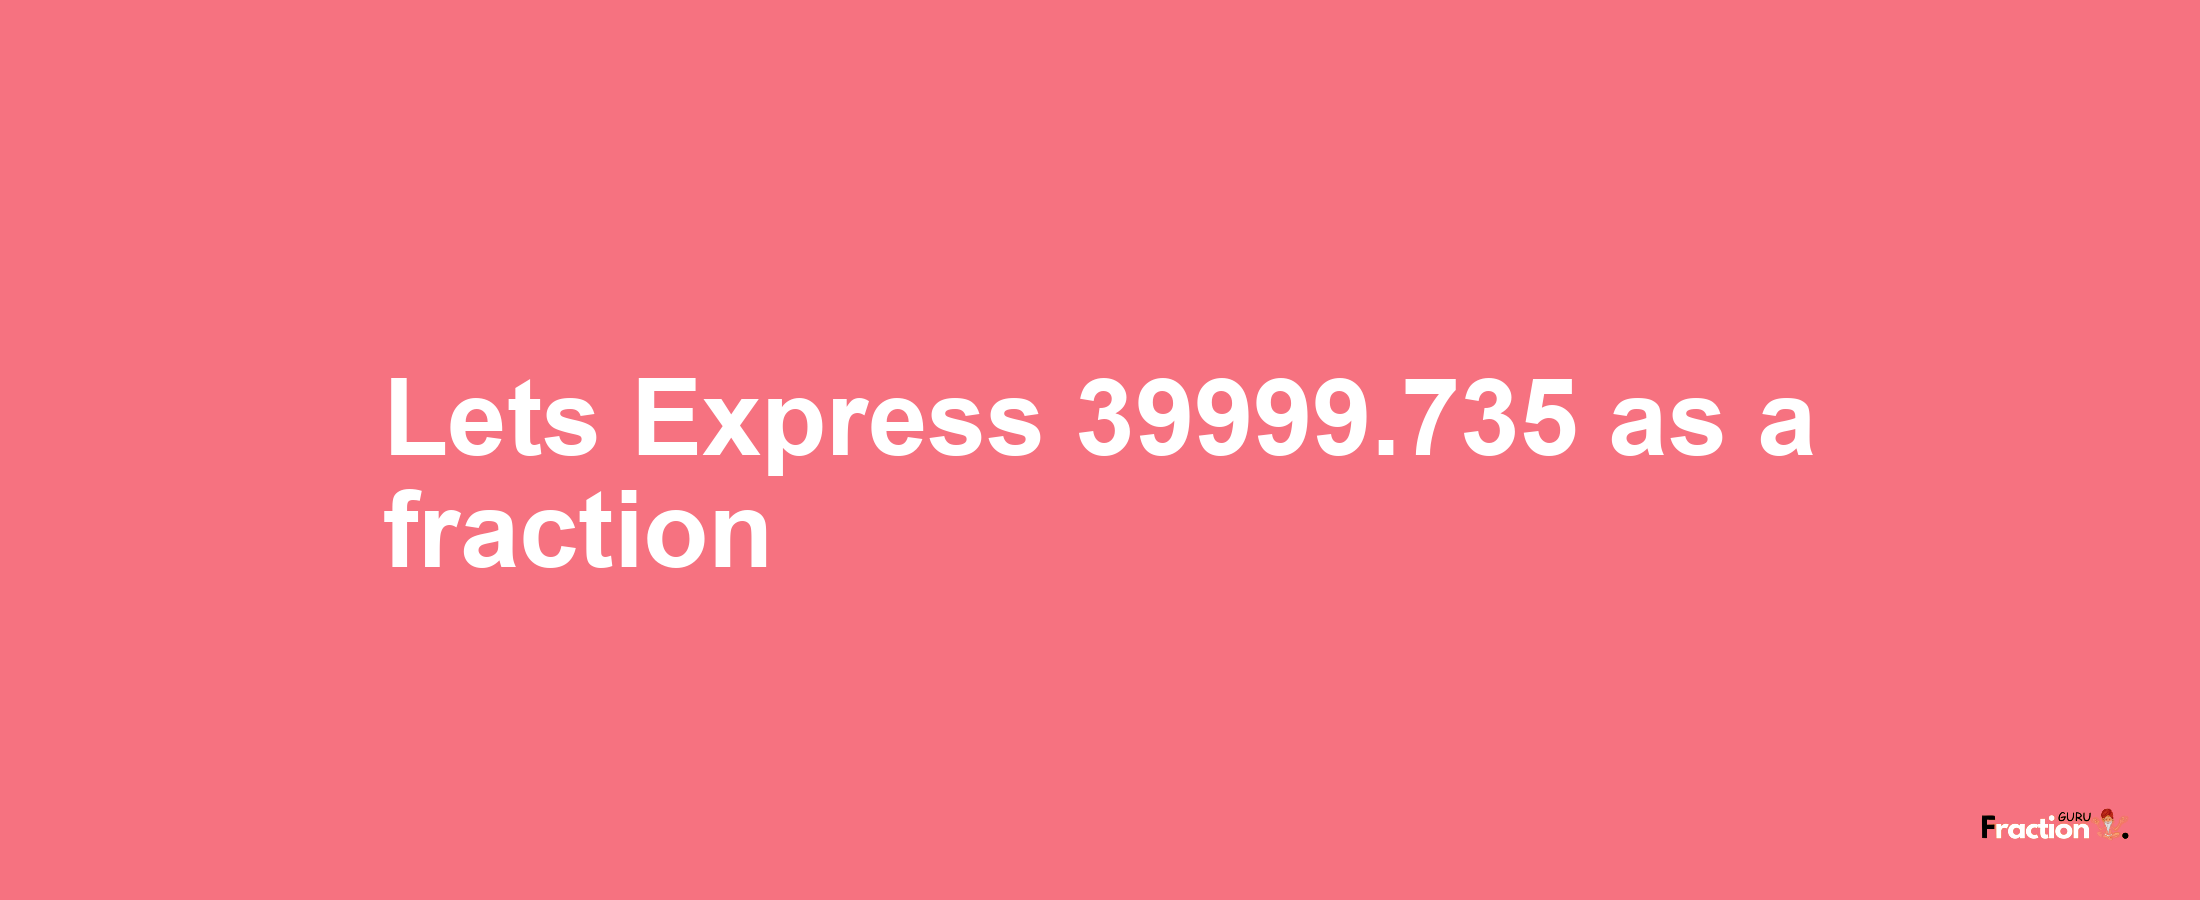 Lets Express 39999.735 as afraction